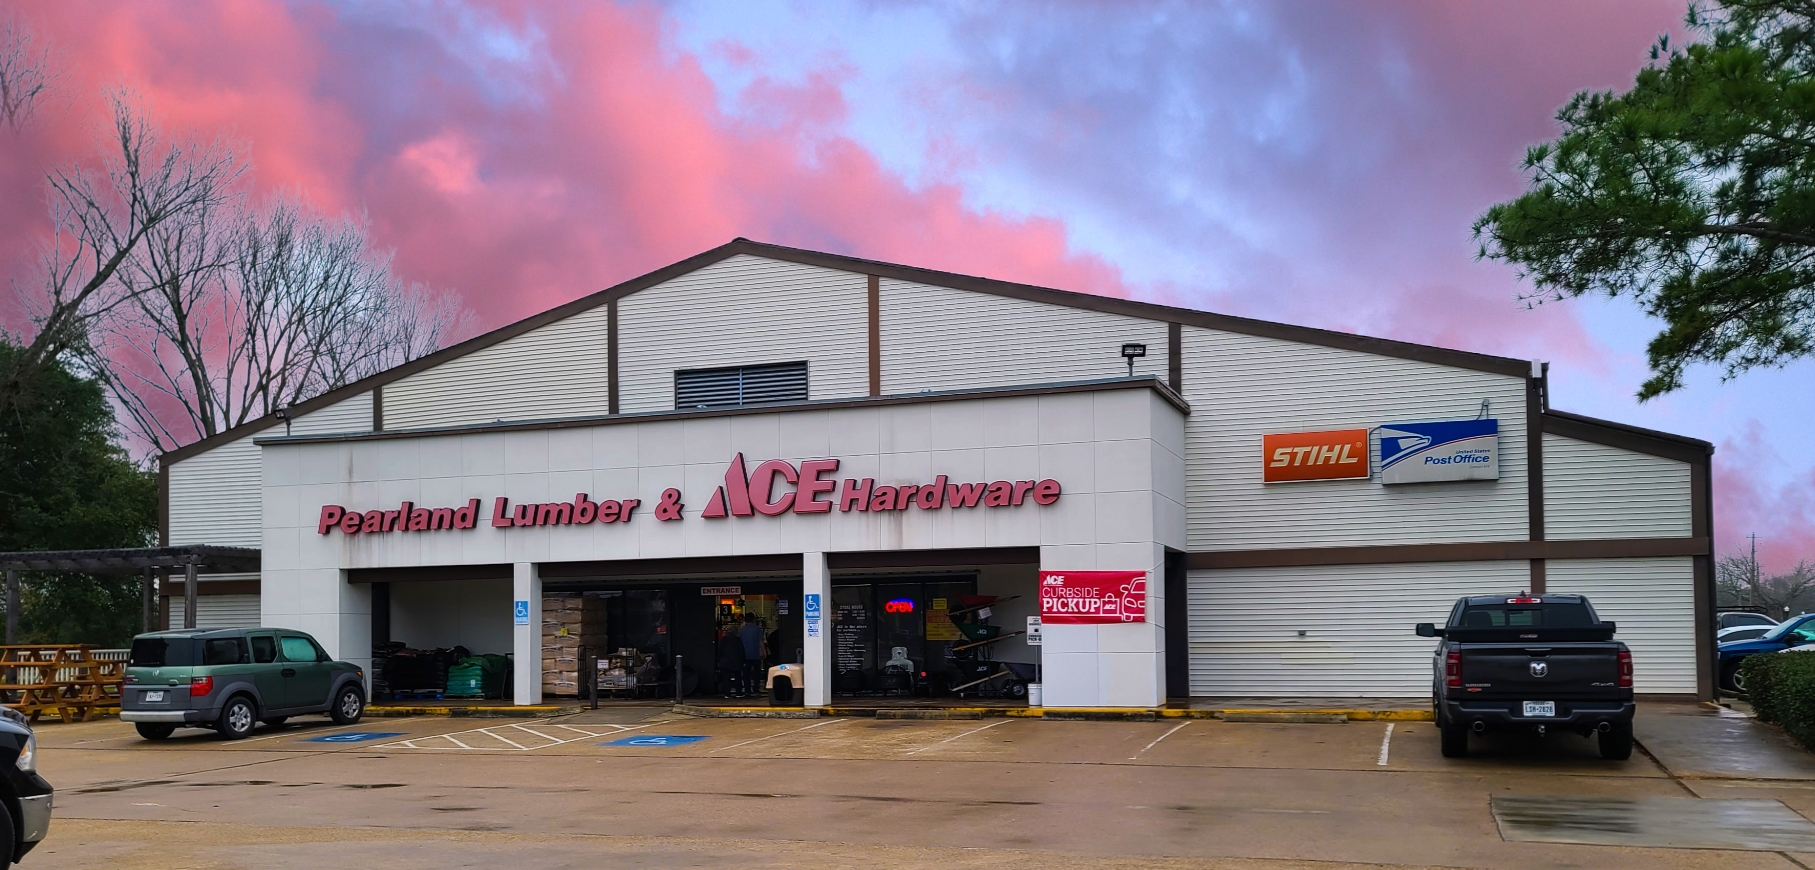 Pearland Lumber Ace Hardware